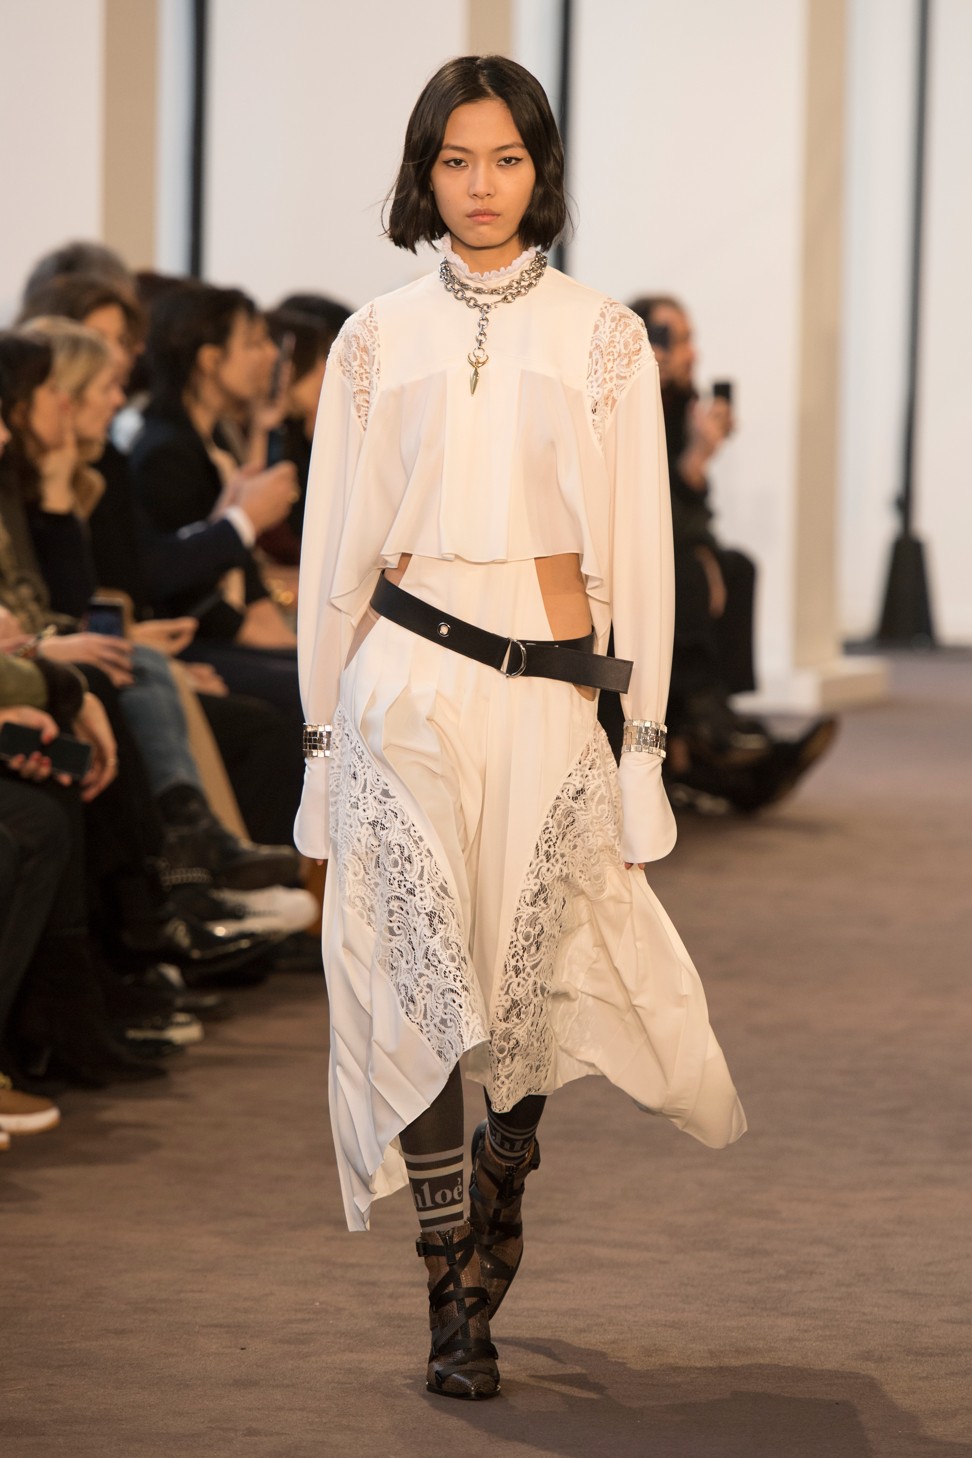 A look from Chloé’s autumn/winter 2018 collection